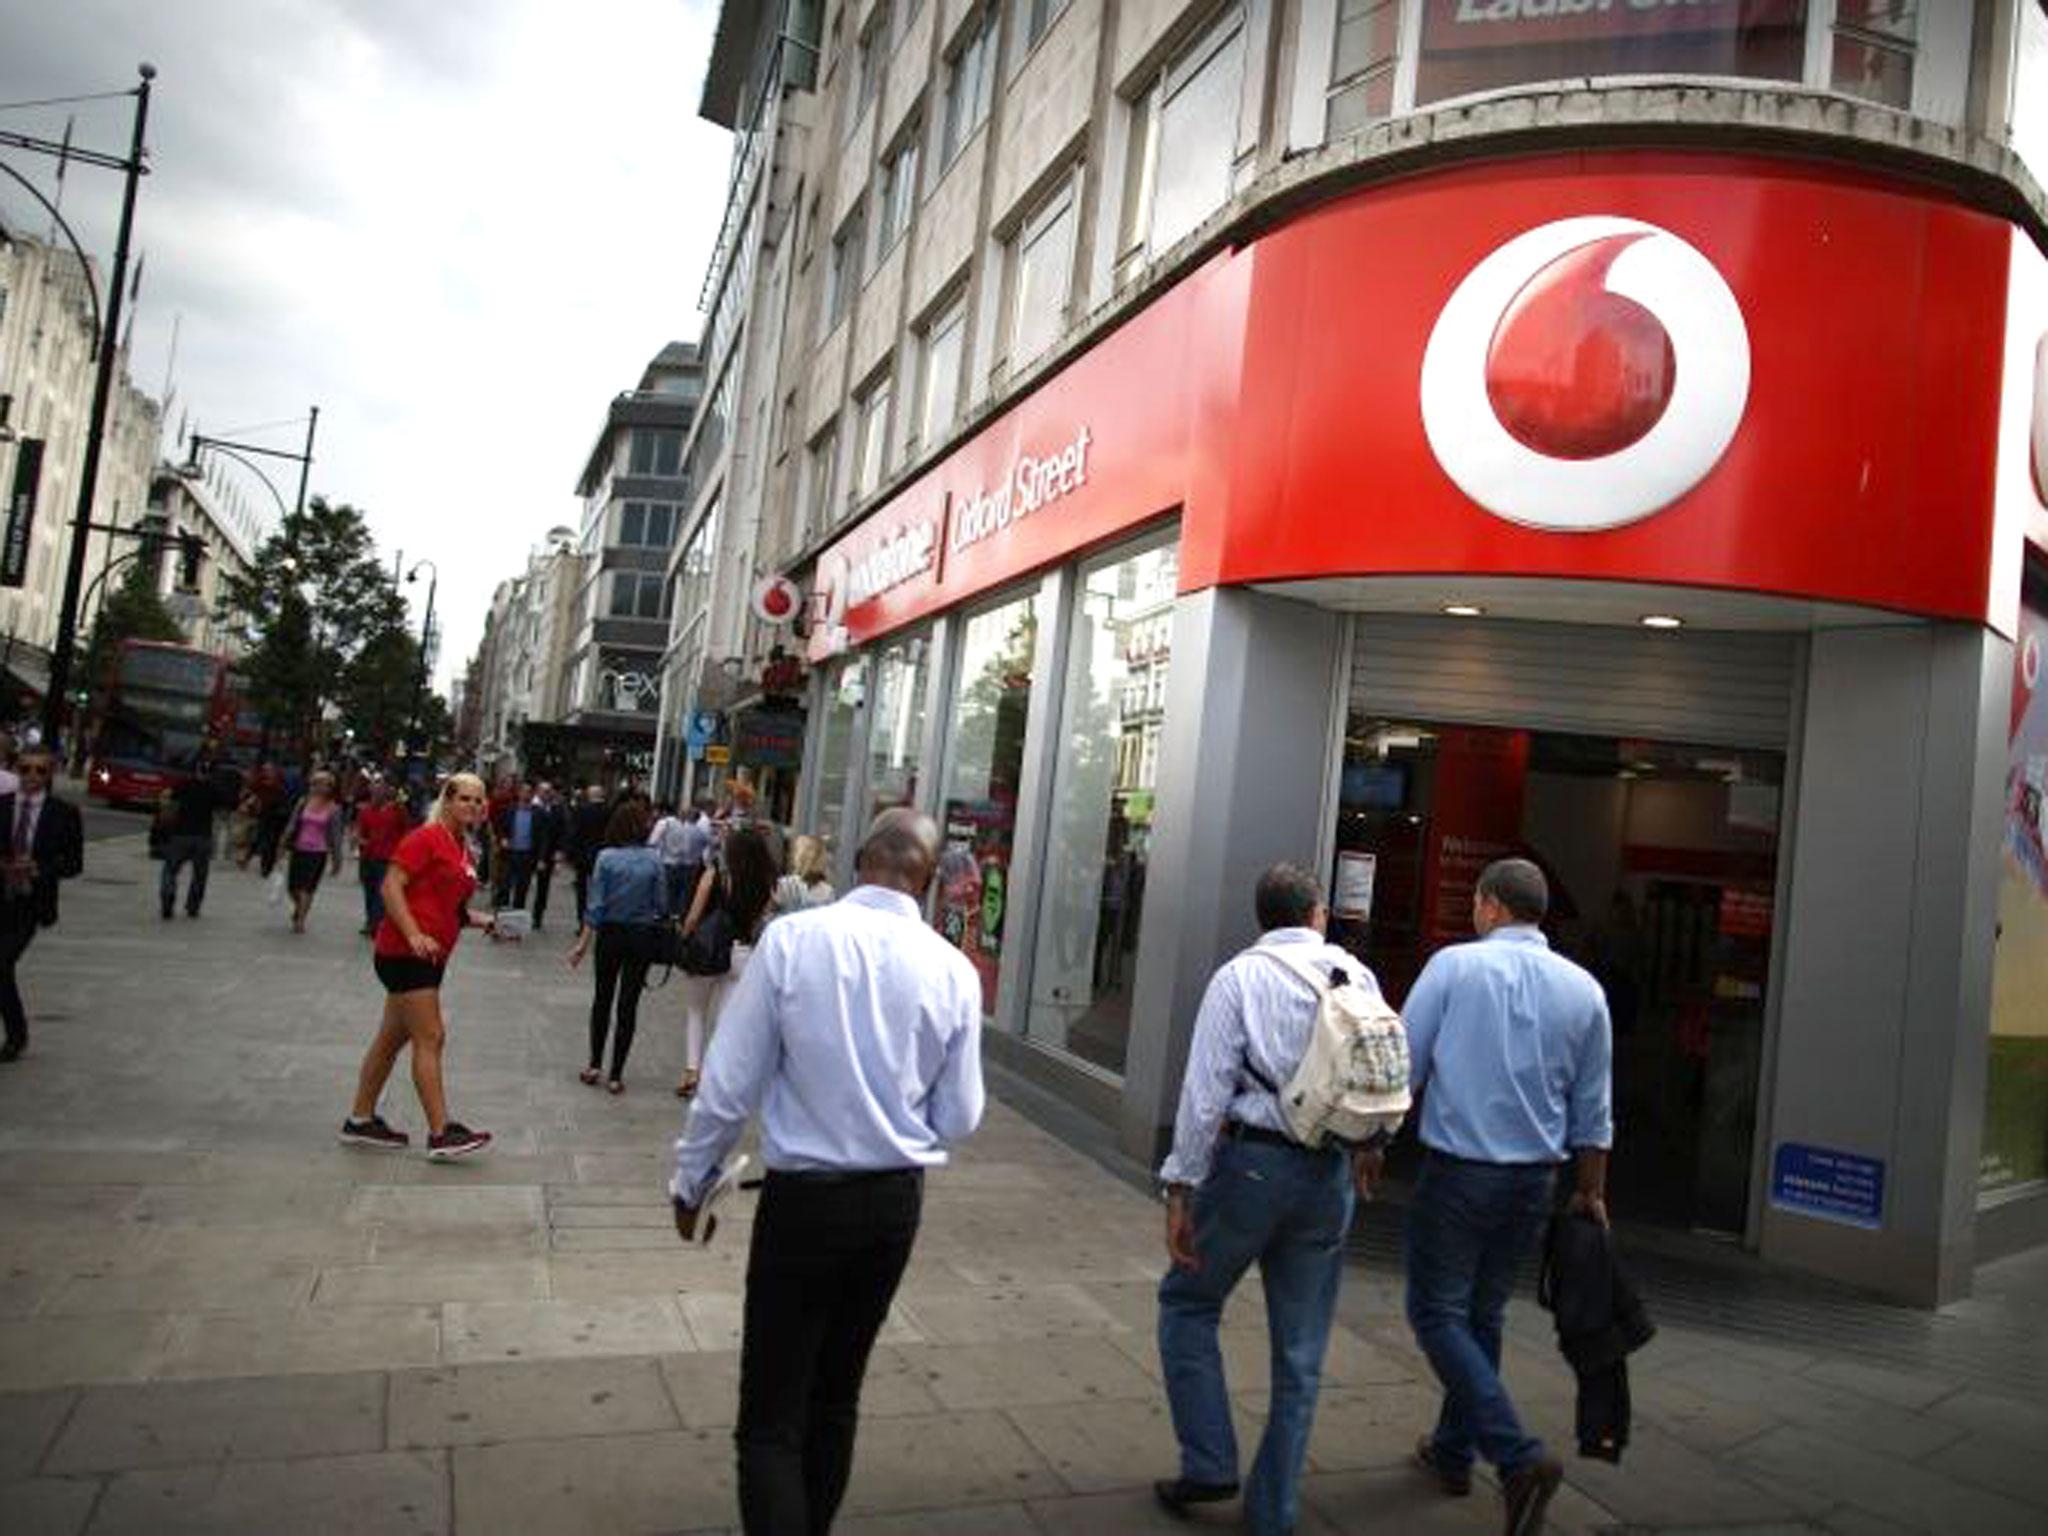 Vodafone has had a difficult time in the UK but has added customers in emerging markets such as India, Turkey and Egypt